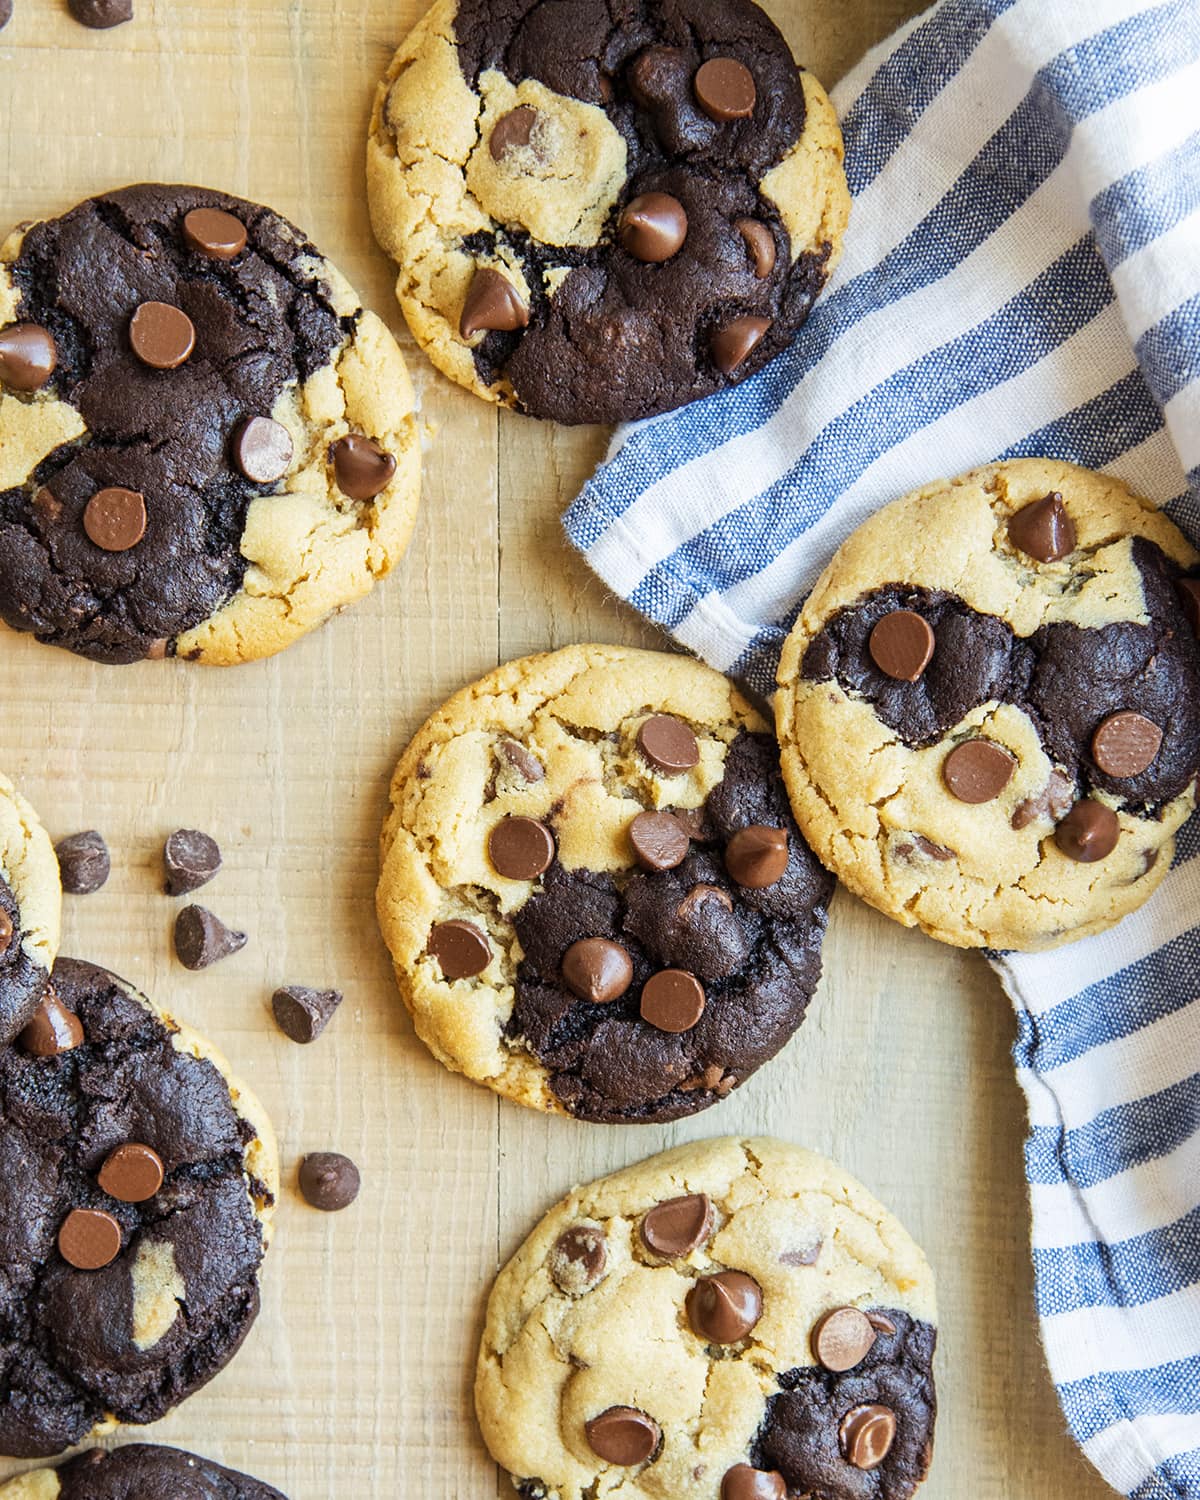 An overhead photo of chocolate and peanut butter marbled cookies on a wooden table.